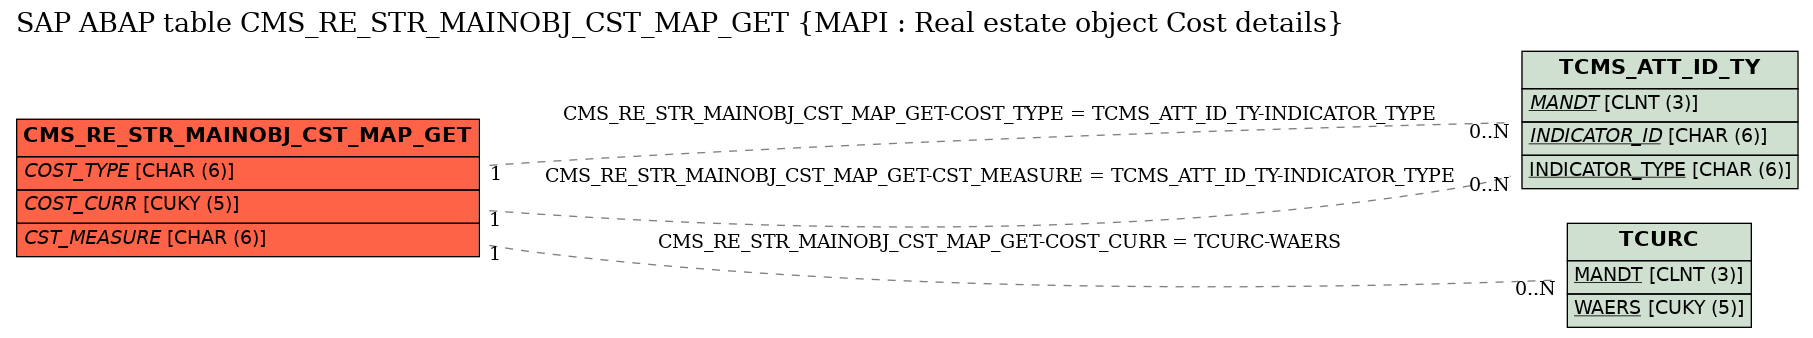 E-R Diagram for table CMS_RE_STR_MAINOBJ_CST_MAP_GET (MAPI : Real estate object Cost details)